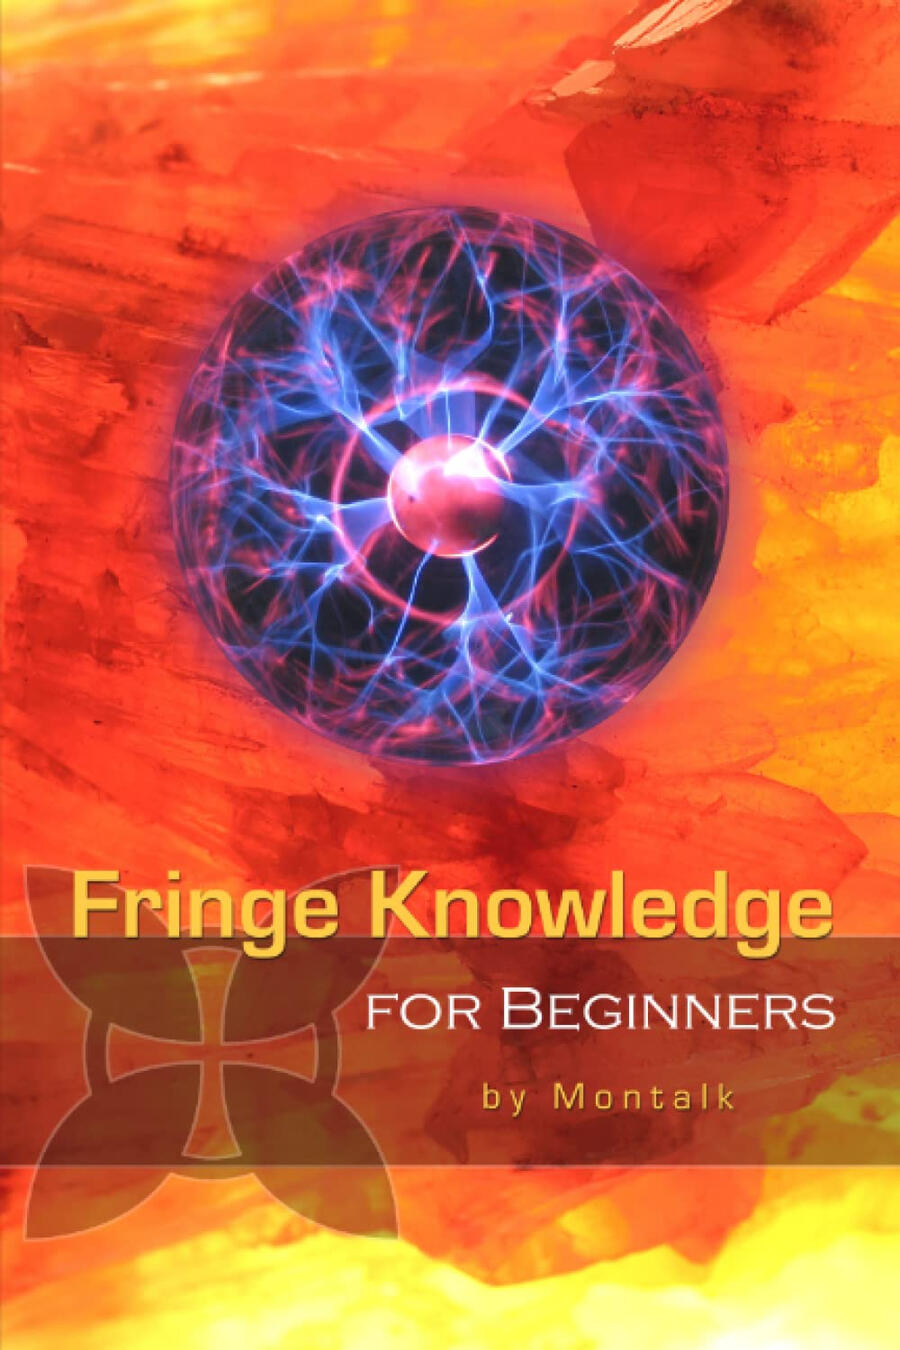 Fringe Knowledge for Beginners: A Primer on Conspiracy, Aliens, and Spiritual Awakening